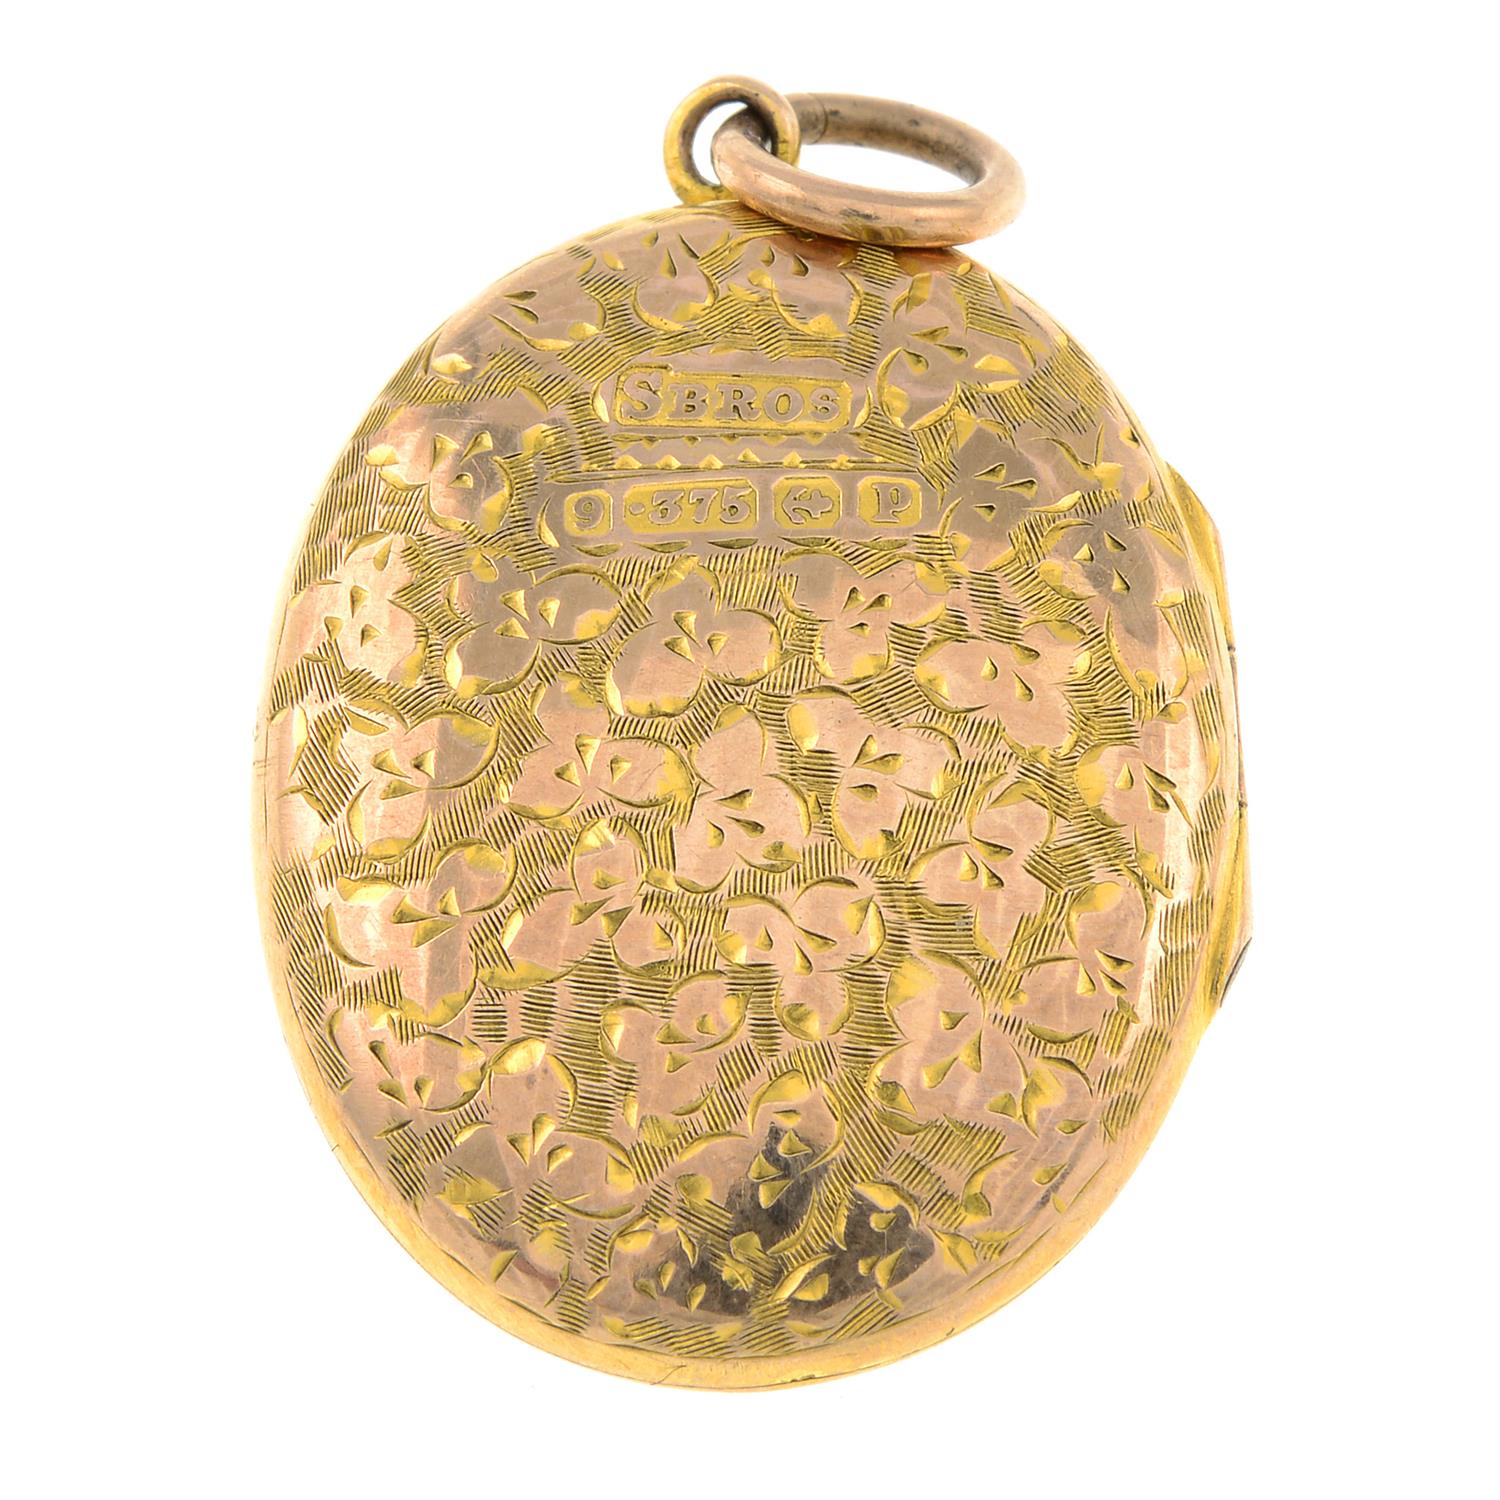 An early 20th century 9ct gold locket, with foliate motif. - Image 2 of 2